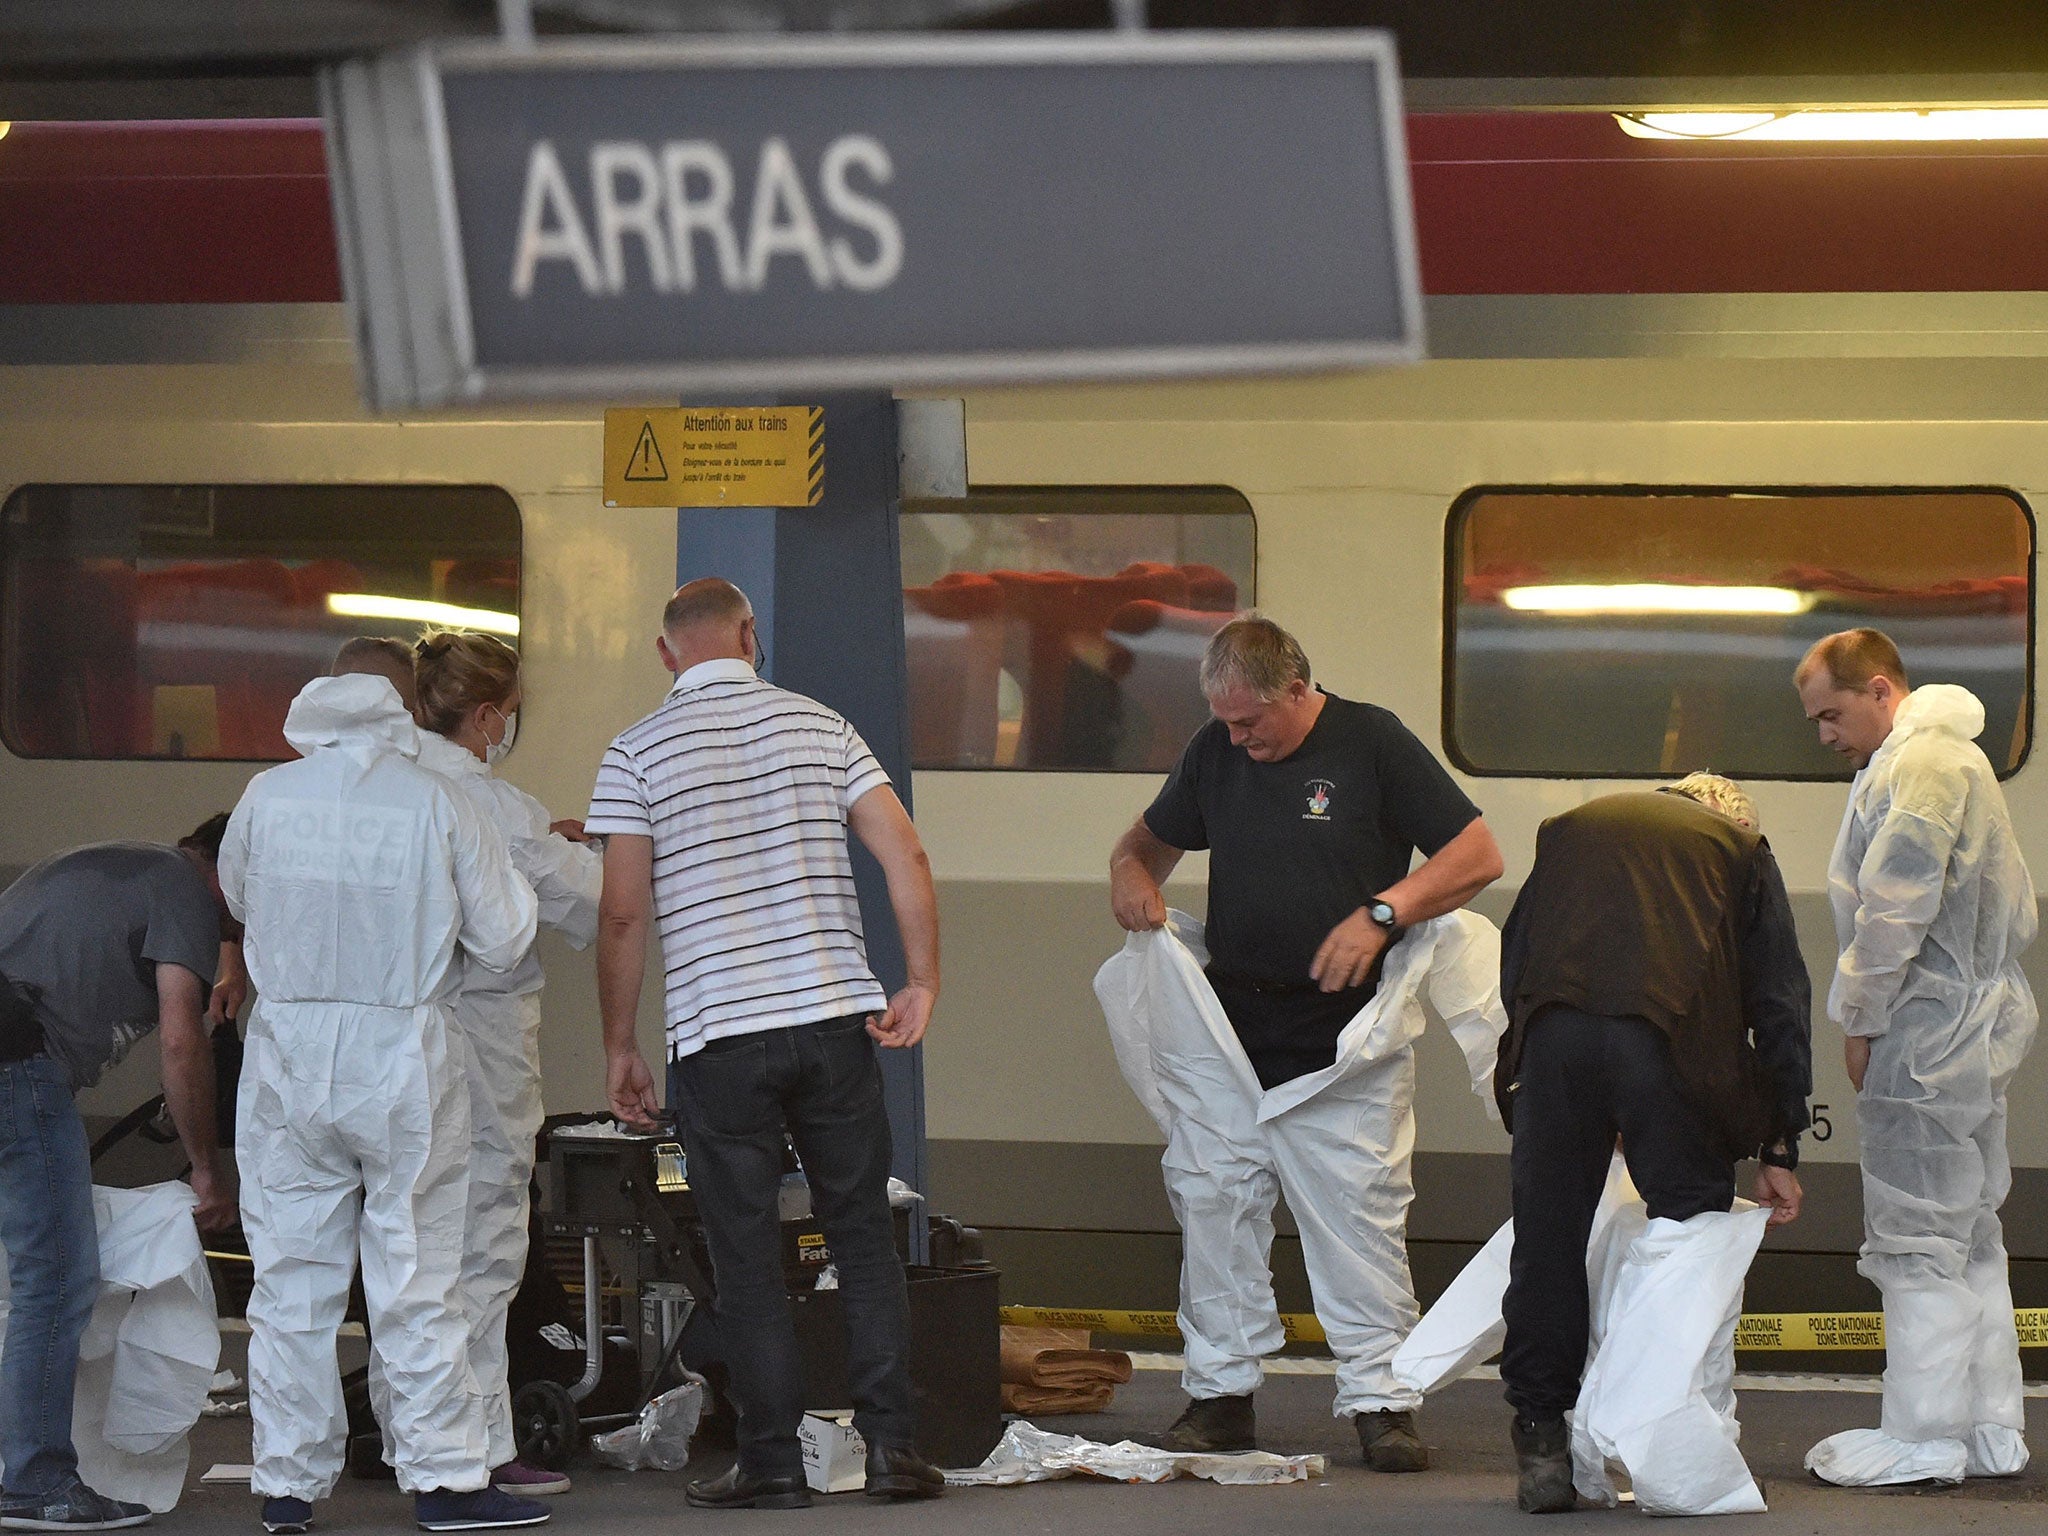 Criminal and forensic investigators put on protective suits on a platform next to a train at the train station in Arras